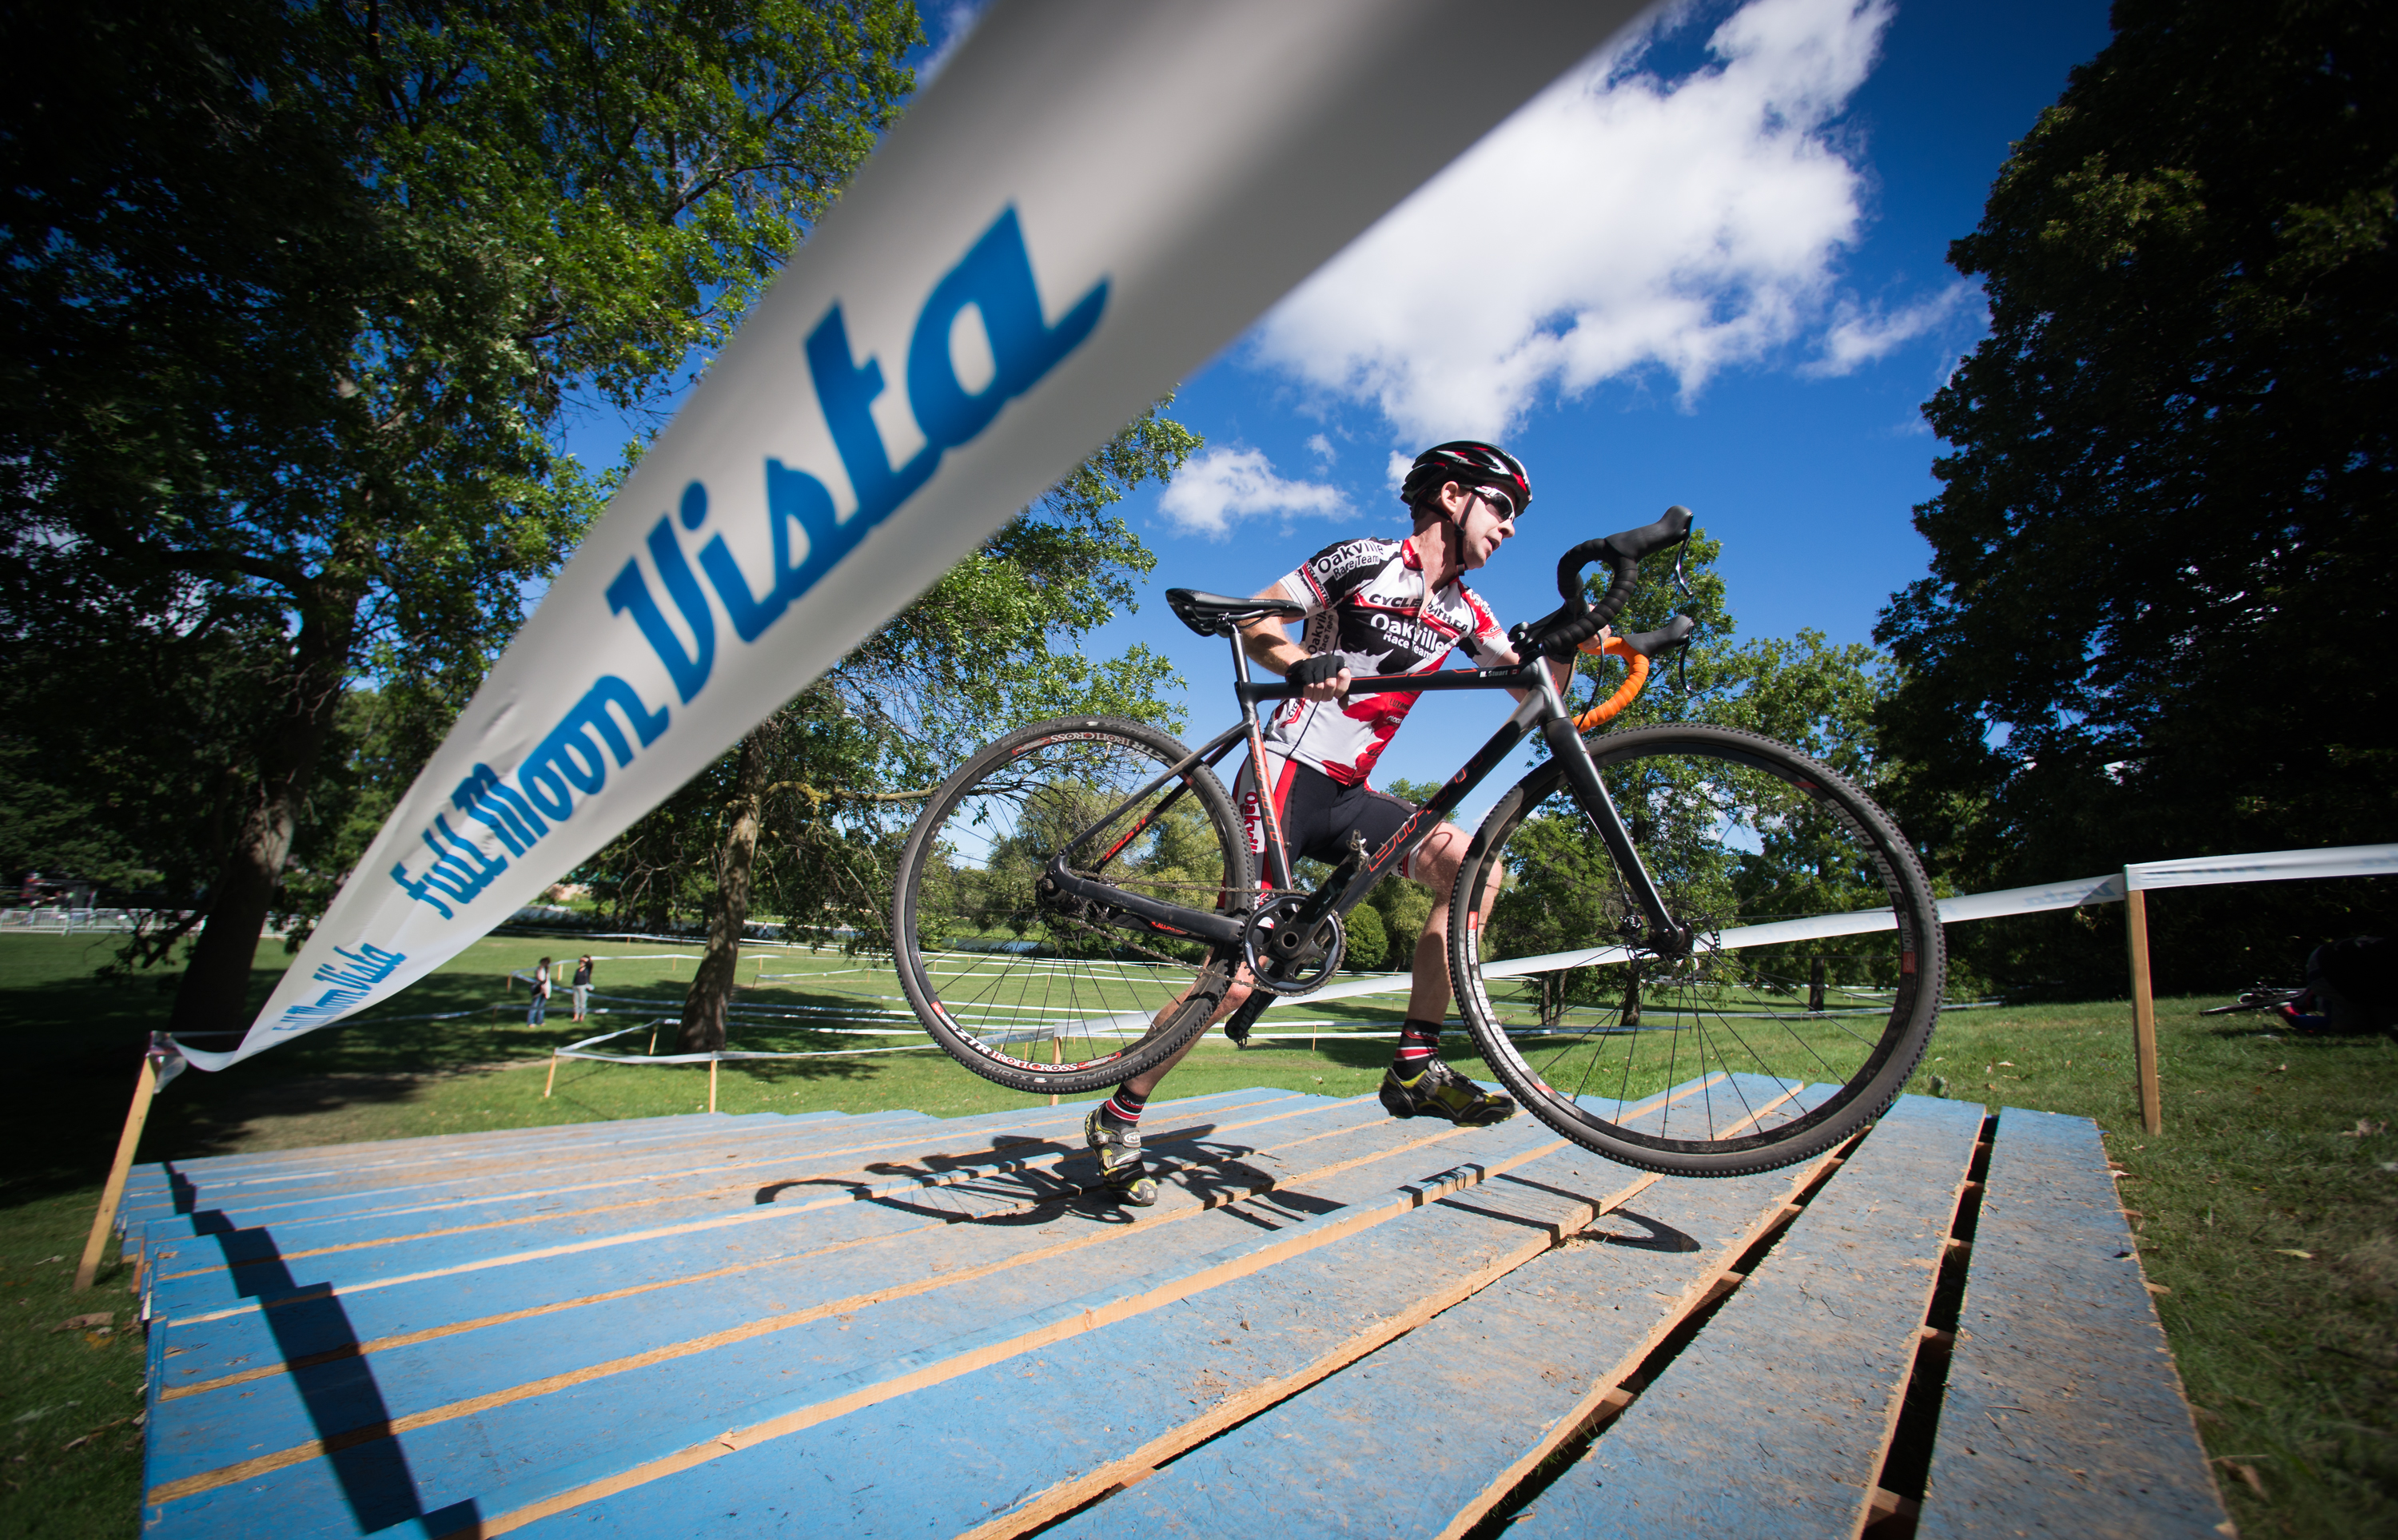 Mark Stuart climbs up the stairs at the Rochester Cyclocross course at Genesee Valley Park in Rochester, N.Y. on Sept. 11, 2016. Stuart placed first in his division.